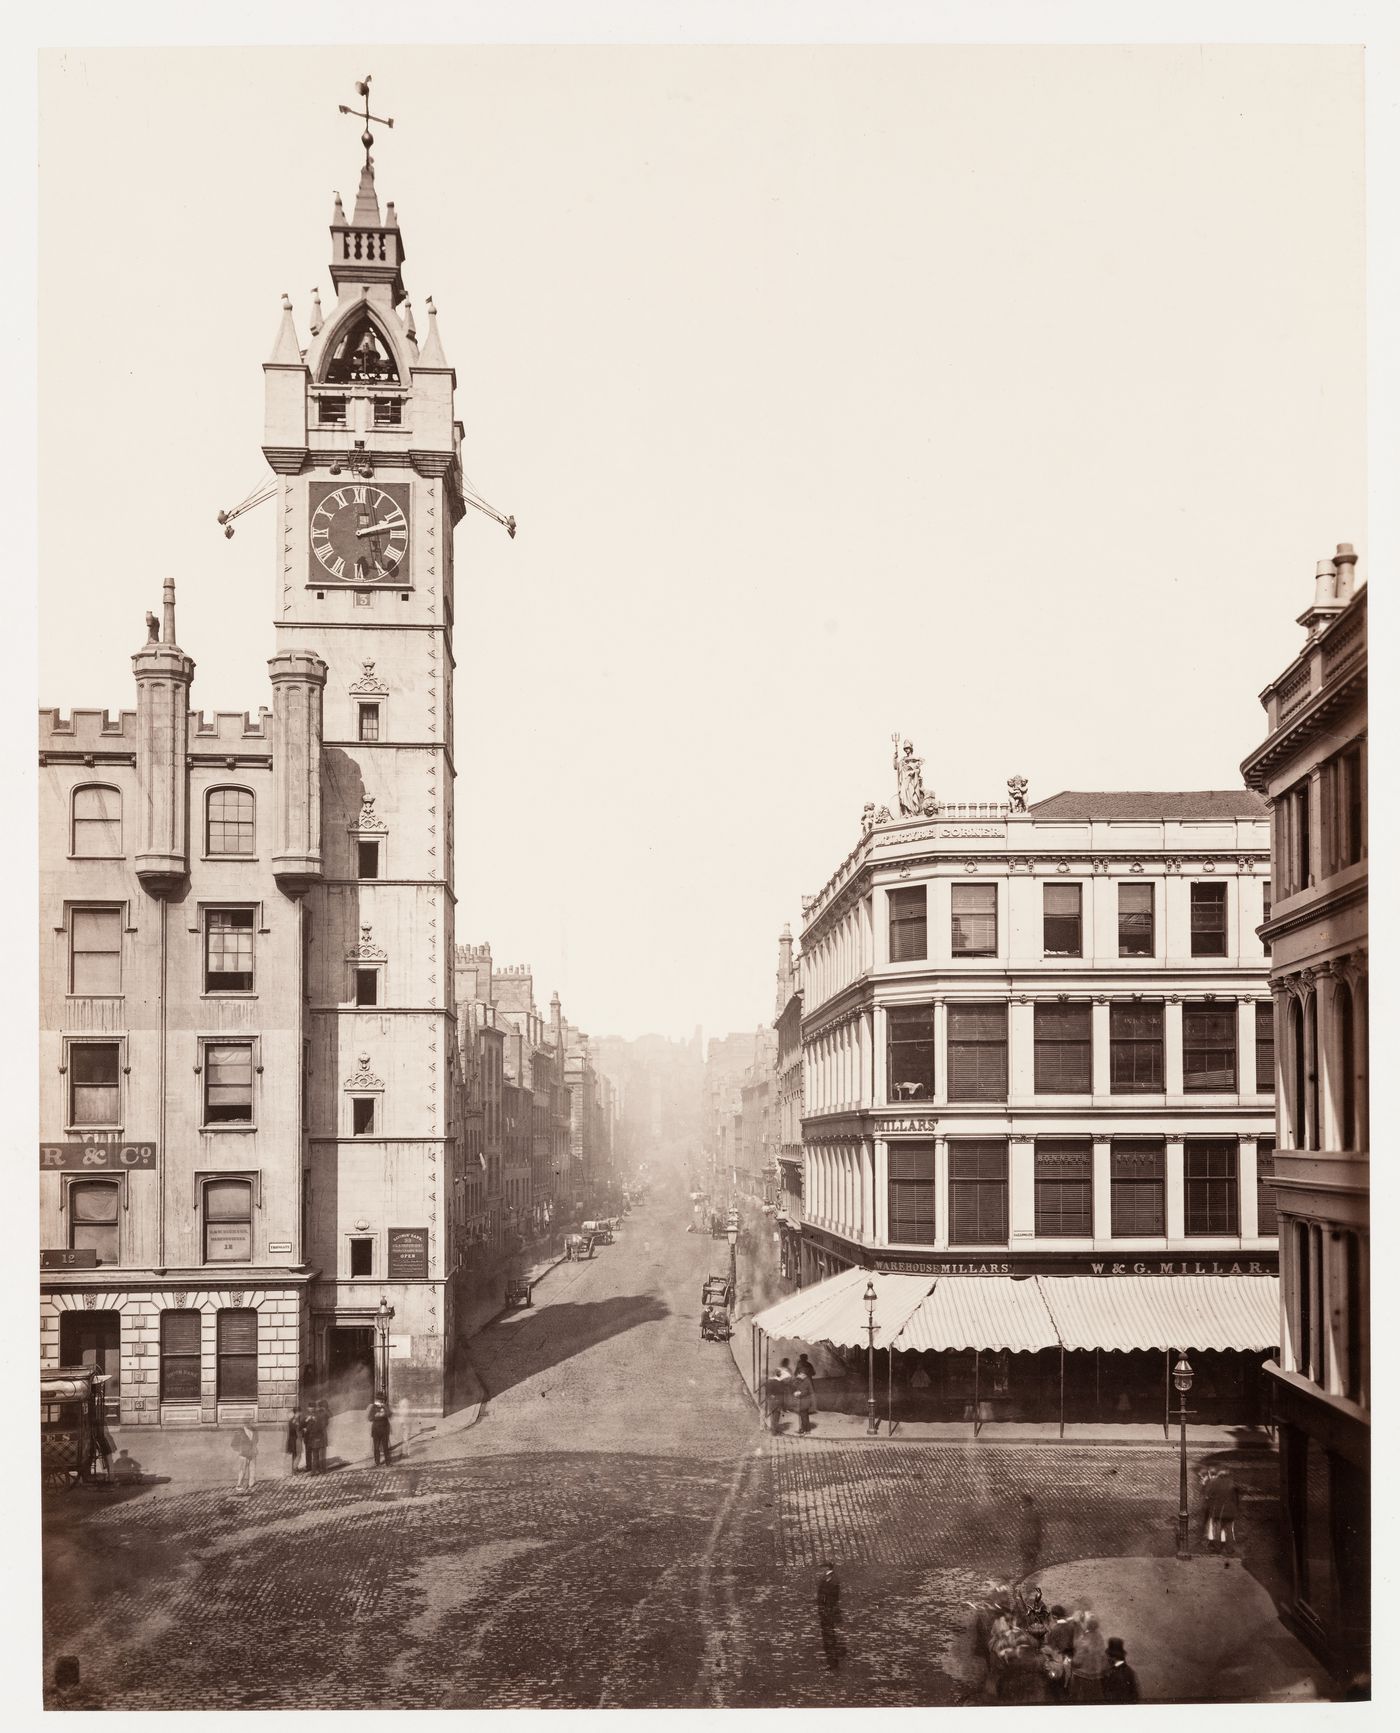 View of High Street from Trongate [street] showing Tolbooth Steeple, Glasgow, Scotland